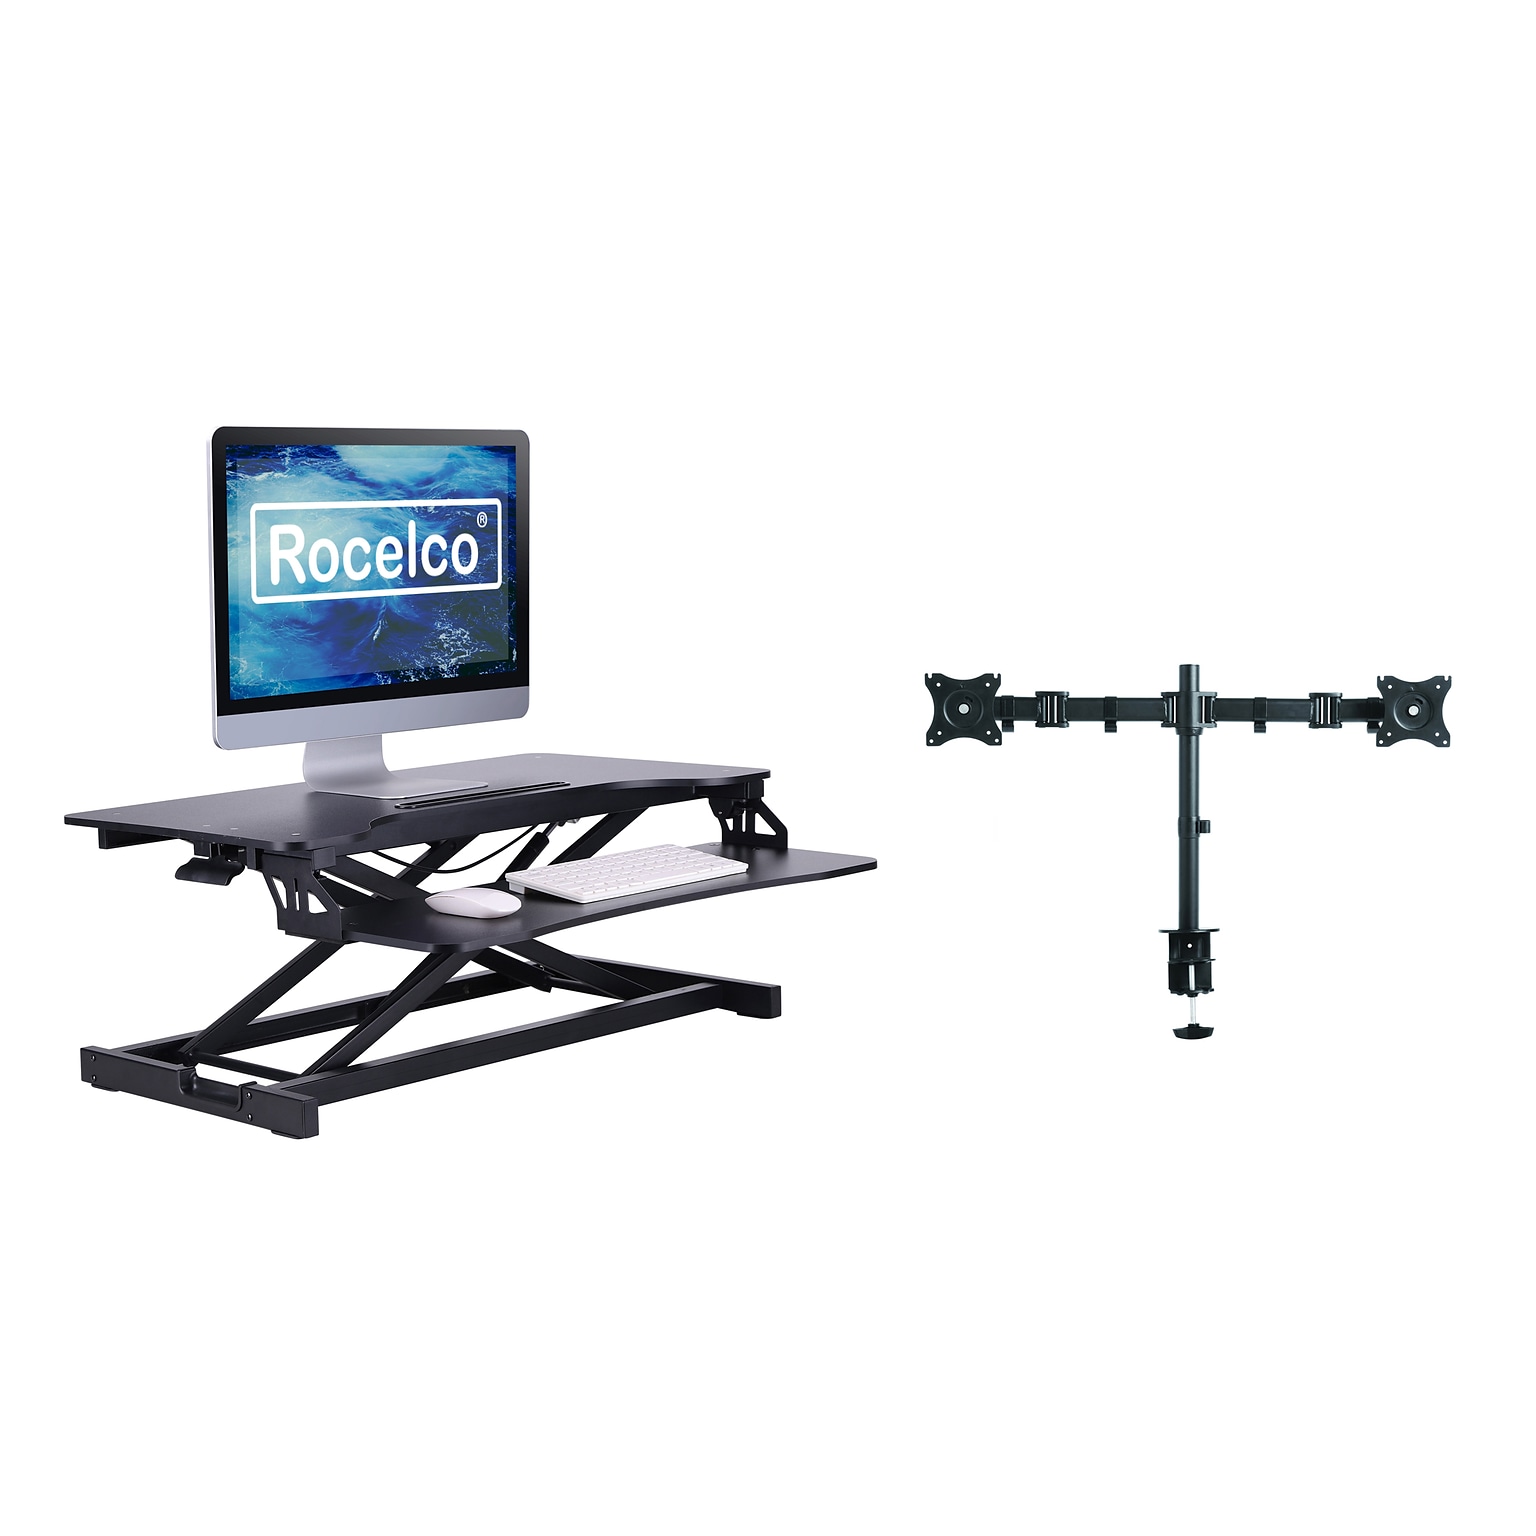 Rocelco 32W Adjustable Standing Desk Converter with Dual Monitor Mount, Black (R VADRB-DM2)